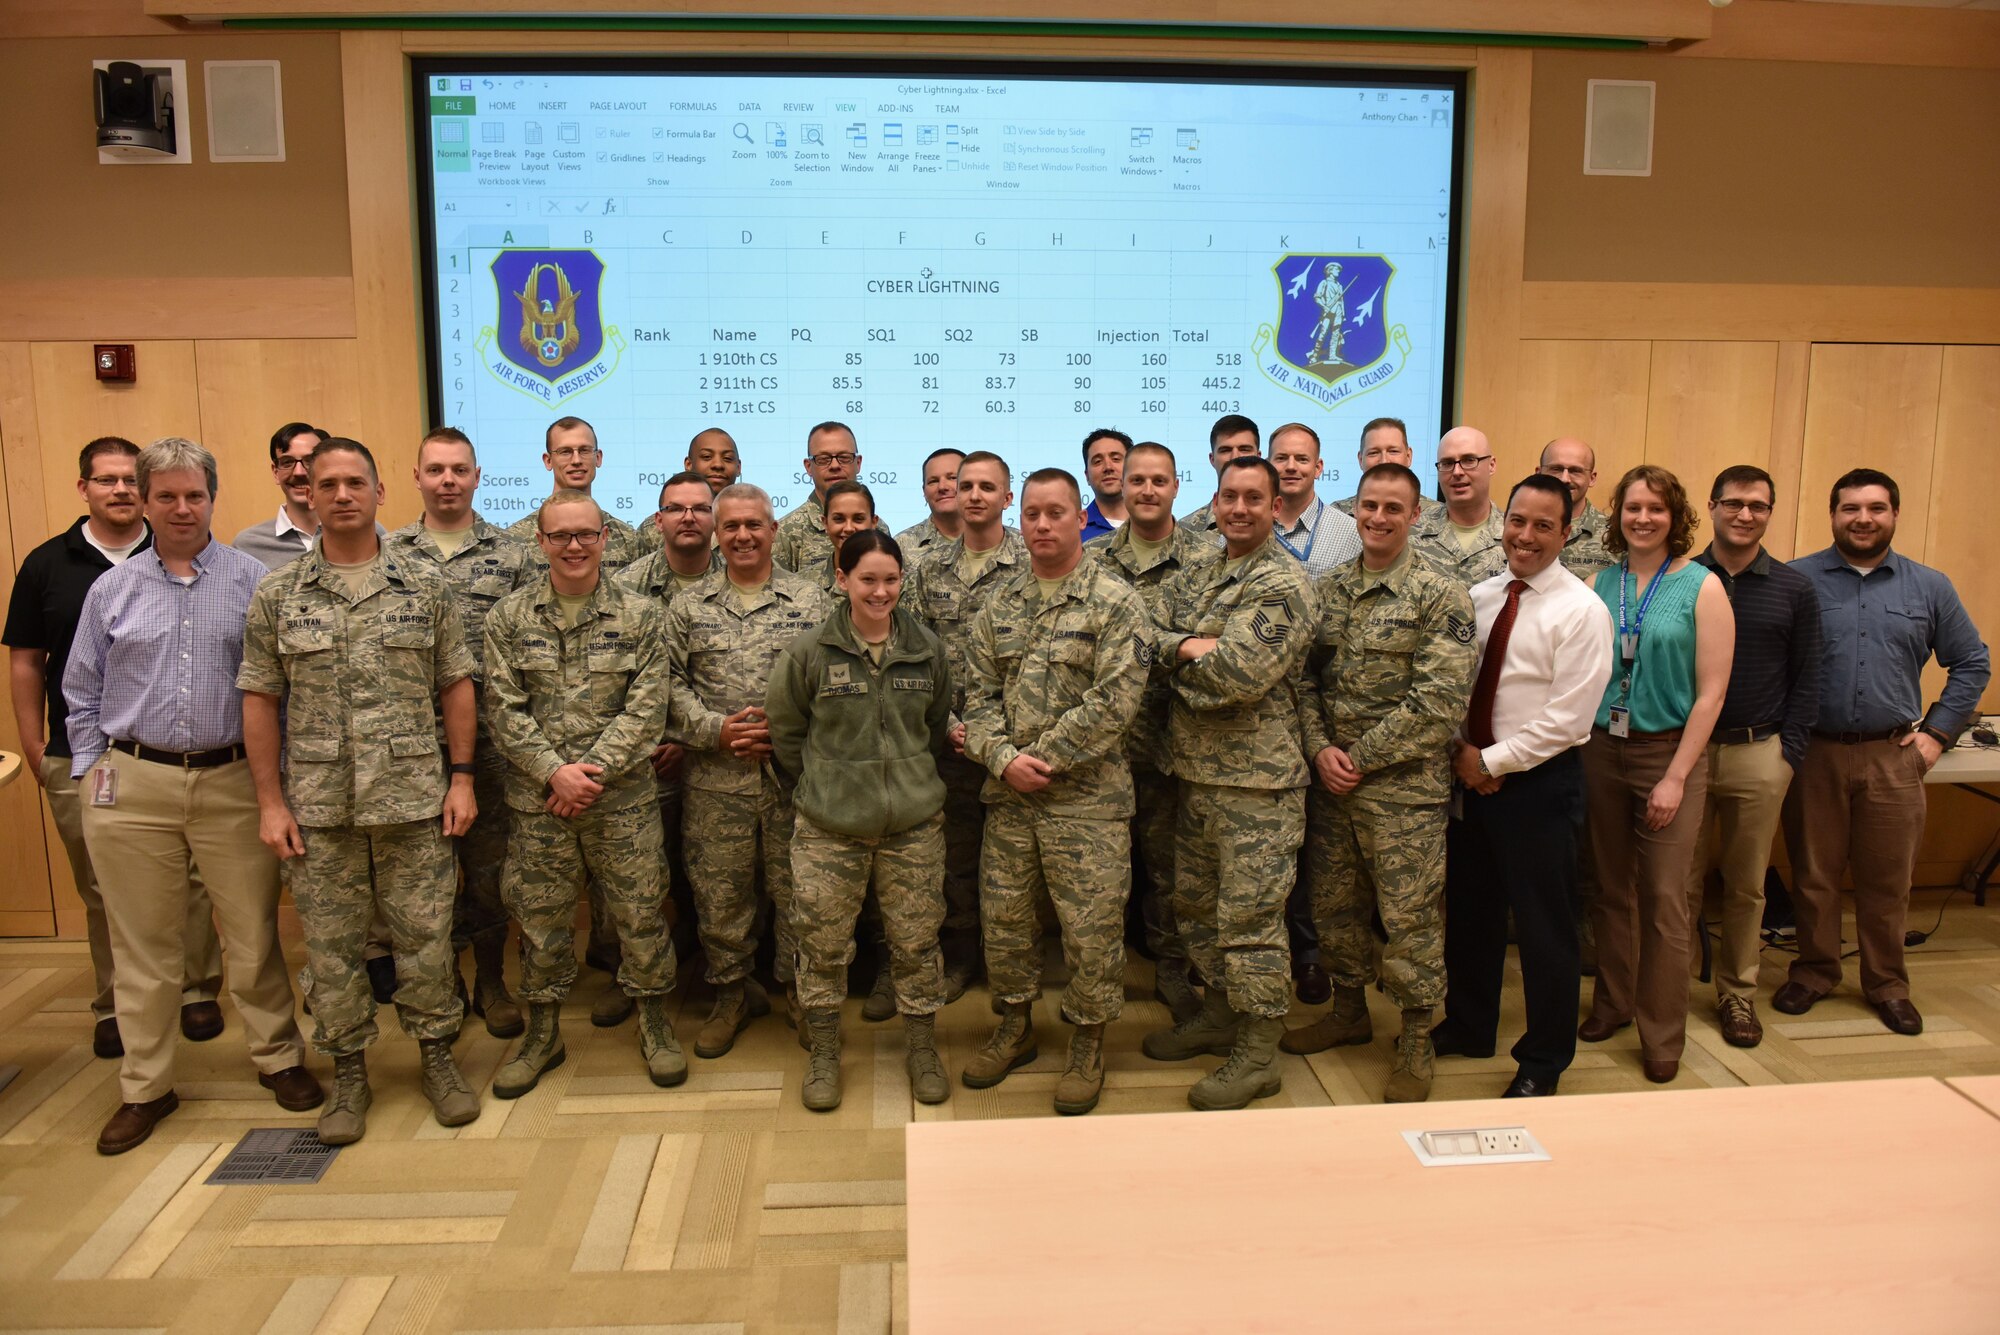 Communications Airmen from the 911th Airlift Wing, the 910th AW and the 171st Air Refueling Wing pose for a group photo during exercise Cyber Lightning at Carnegie Melon University, Pennsylvania, May 18, 2016. Cyber Lightning was a three-day exercise designed to teach Airmen about cyber threats and provide the skills needed to combat them. (U.S. Air Force photo by Airman Beth Kobily)